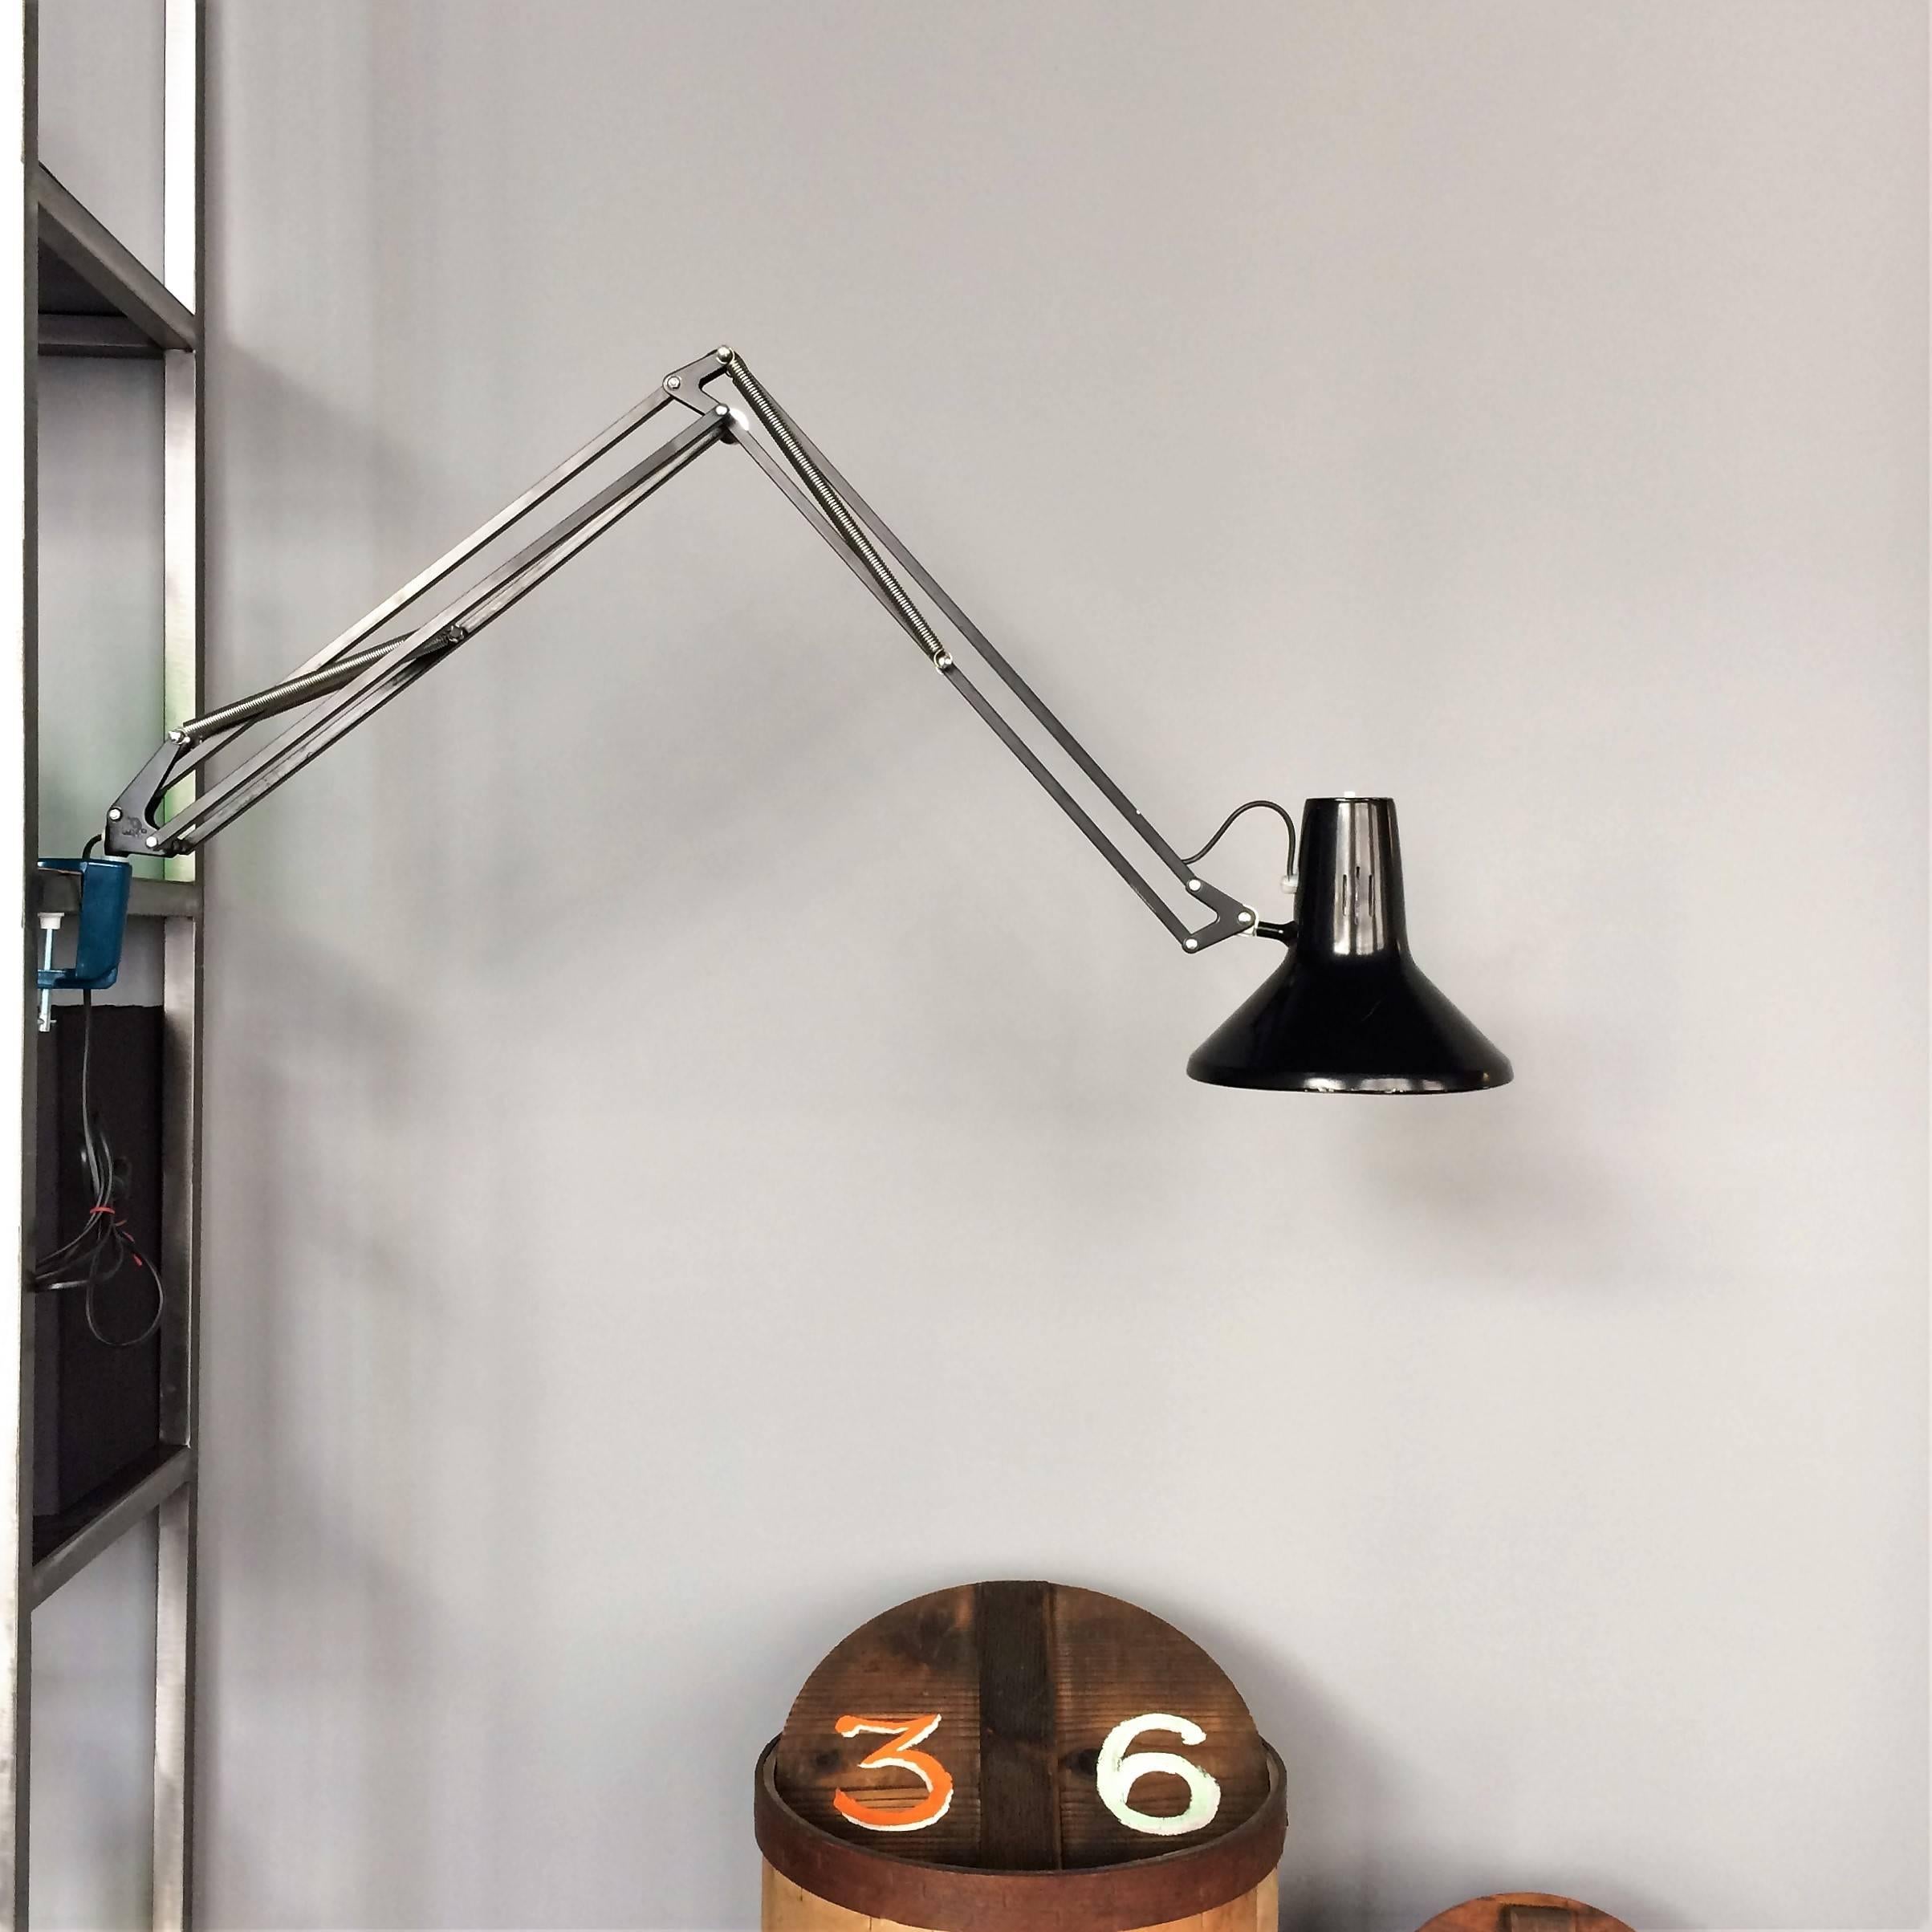 An iconic L-1P vintage Luxo architect's lamp. Great Industrial design with clean modern lines in a Classic black color, looks great on a desk. Made by the Luxo lighting company in Norway. The L-1 was designed by Jac Jacobsen in 1937.

Design period: